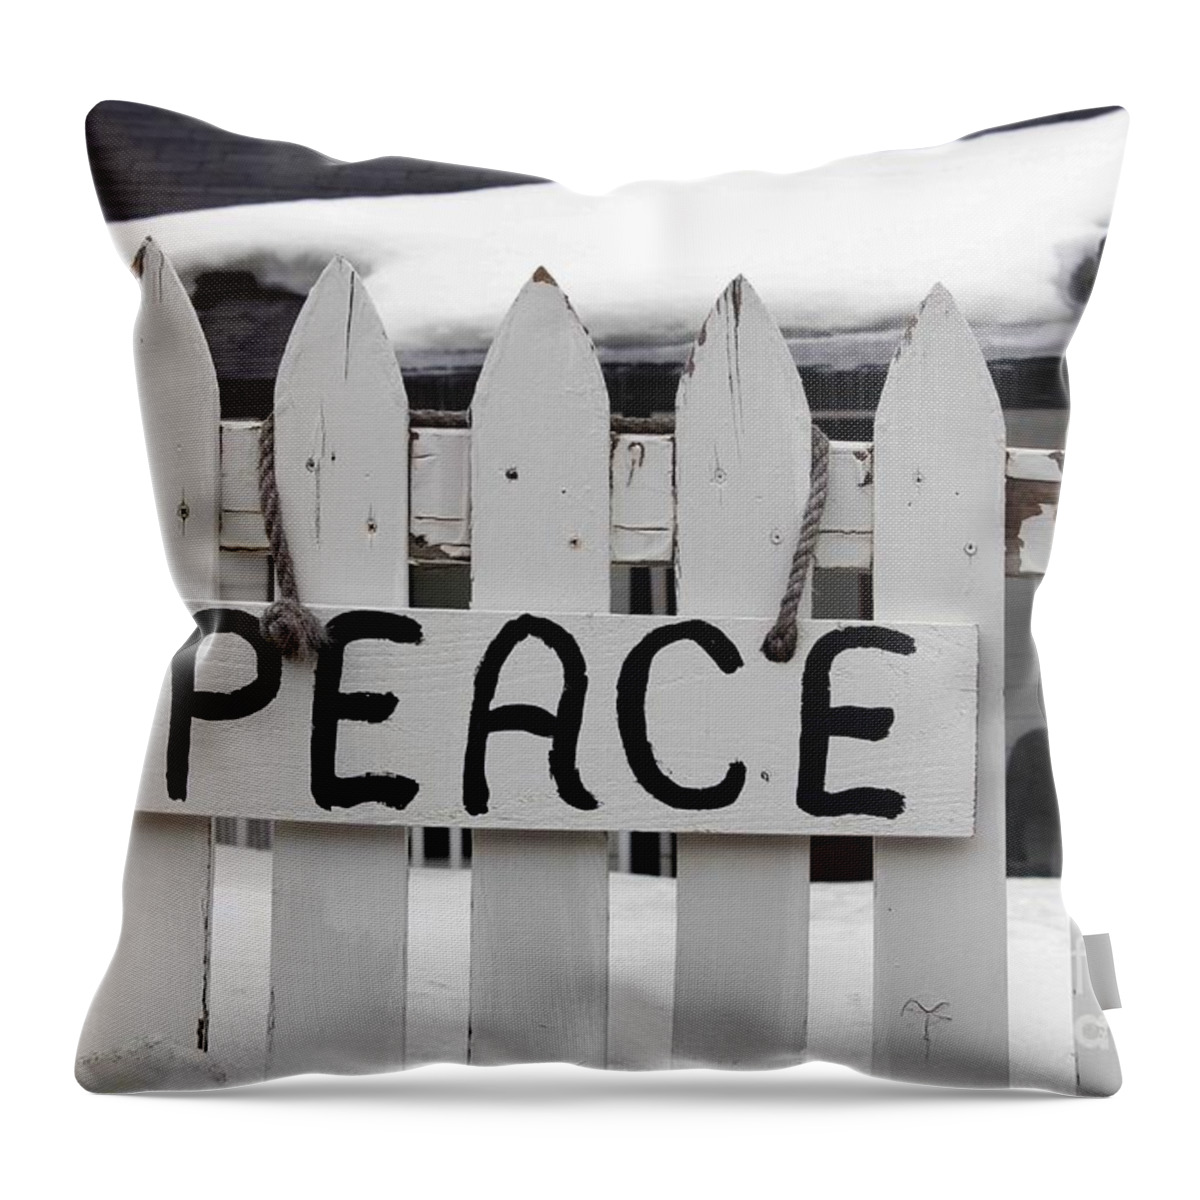 Peace Throw Pillow featuring the photograph Peace by Fiona Kennard